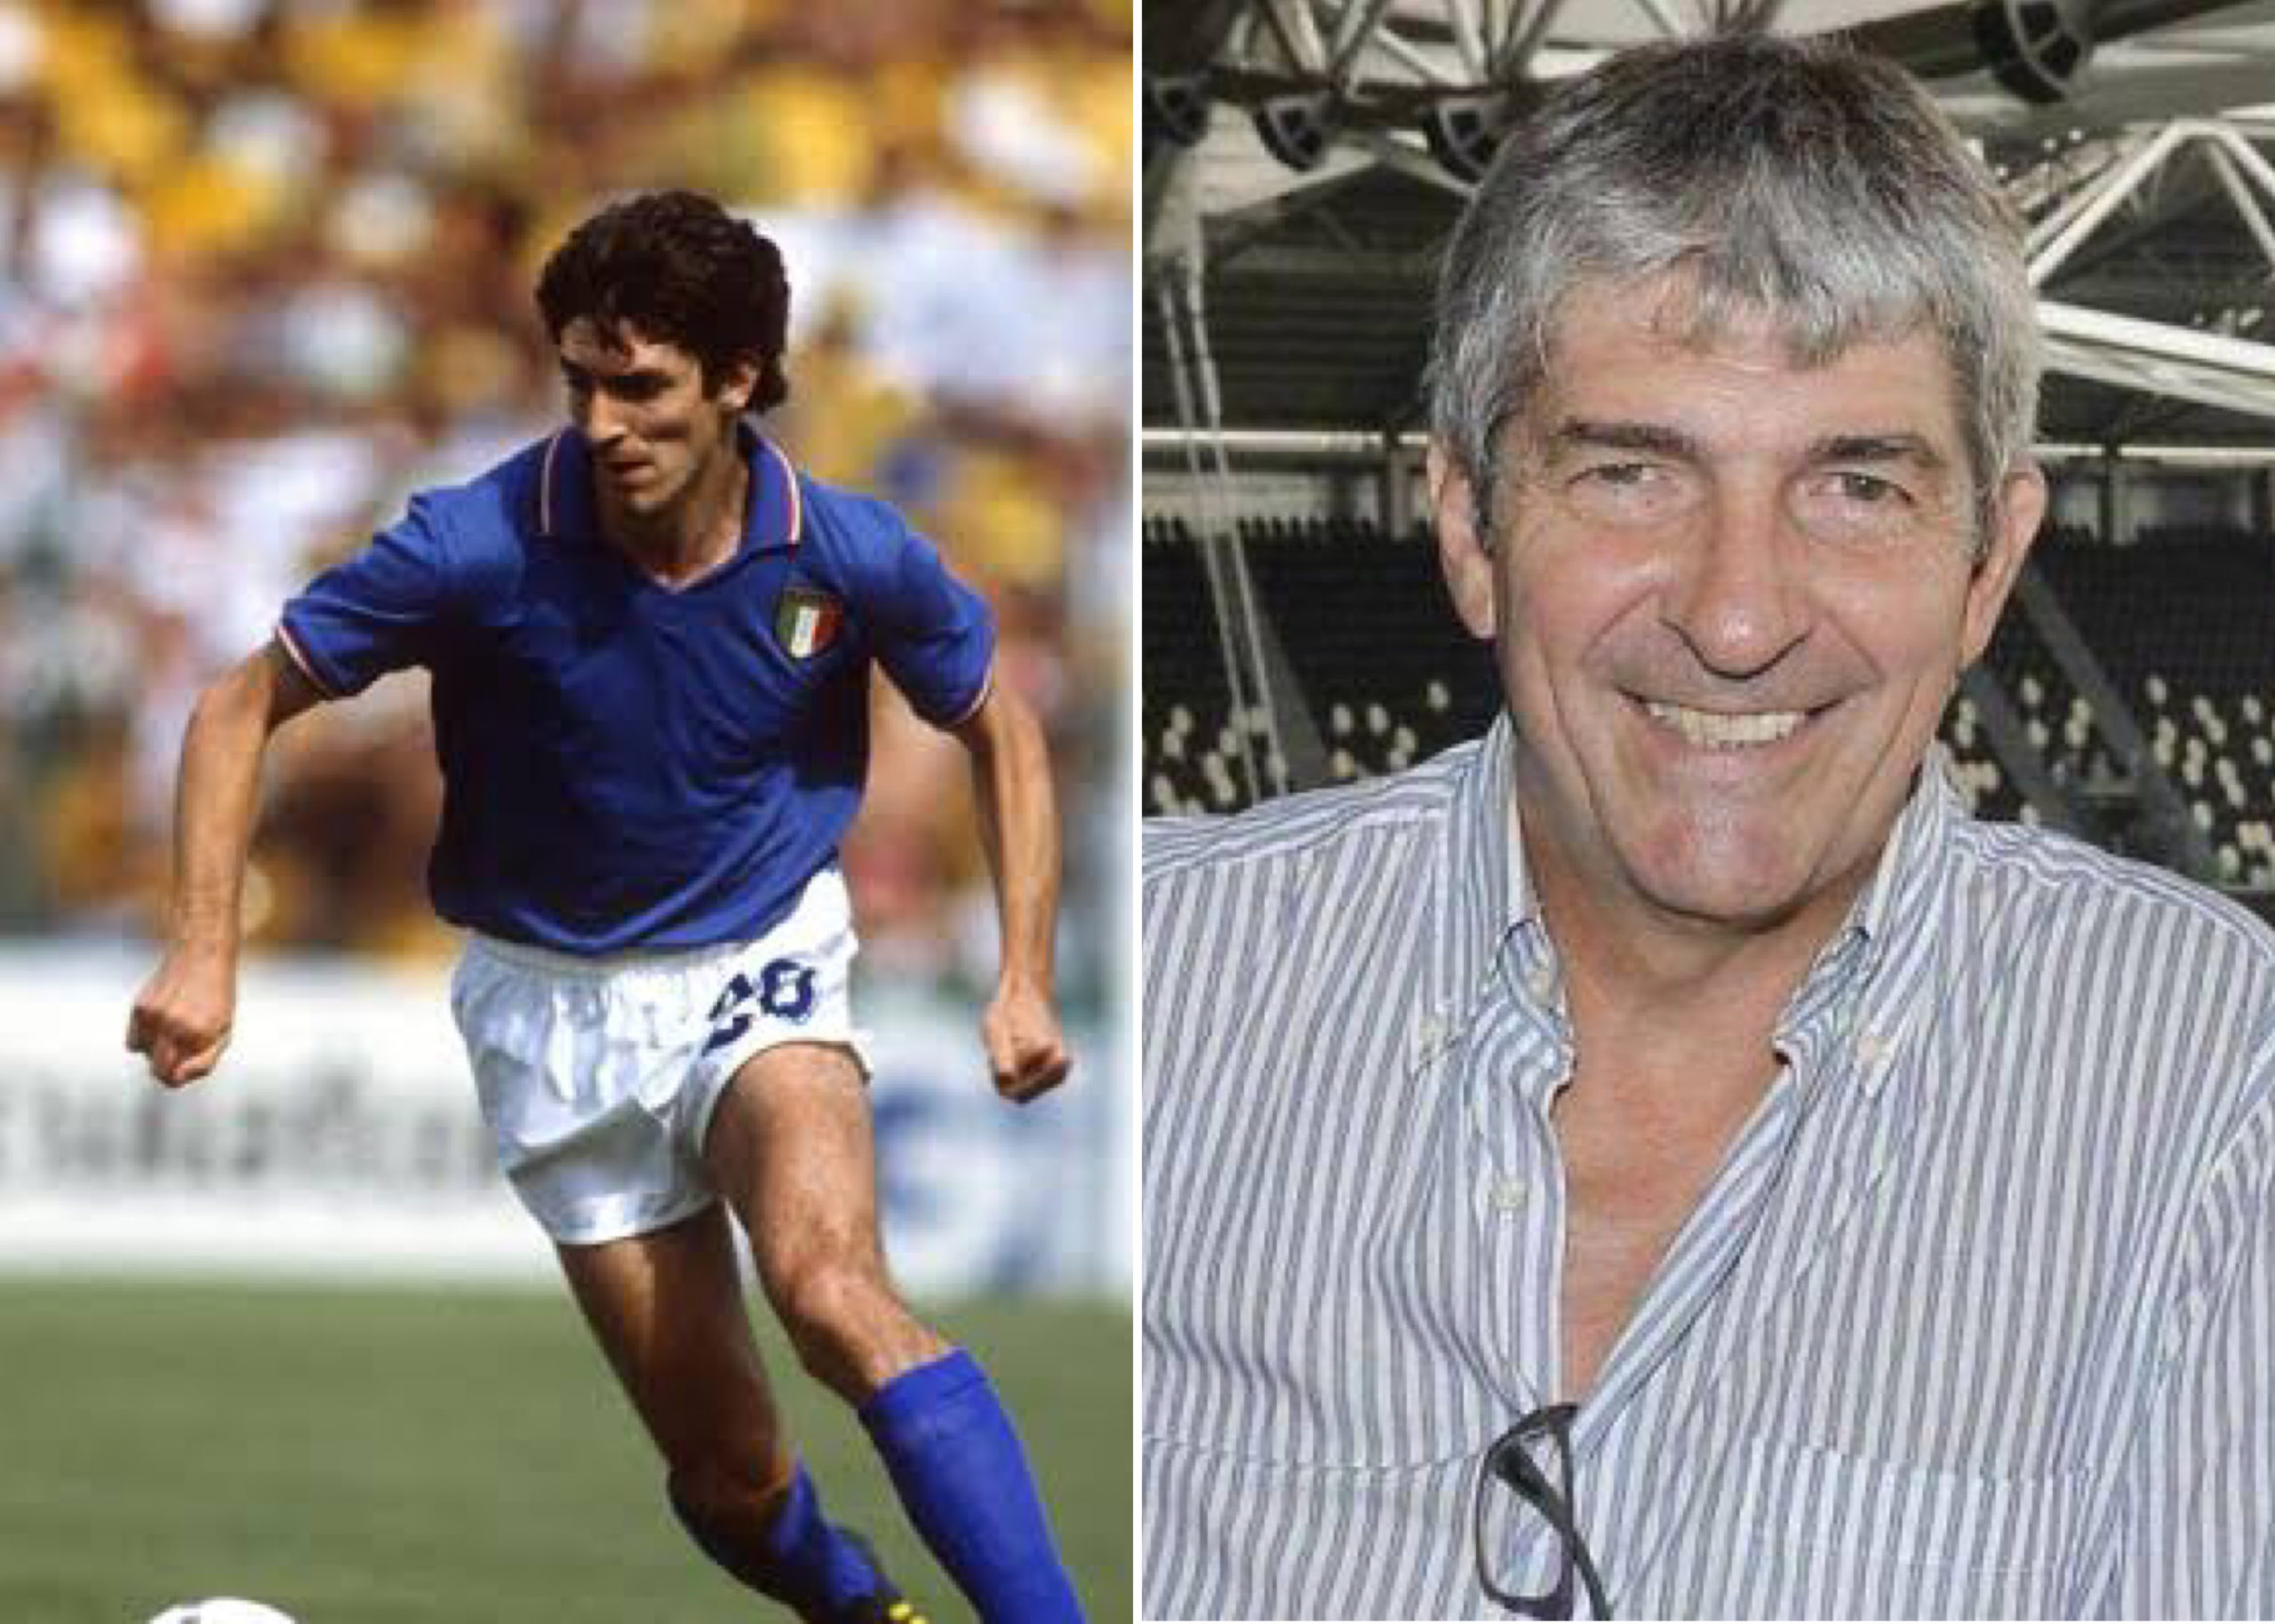 Paolo Rossi, Italian Football Legend And 1982 World Cup Winner, Dies At 64